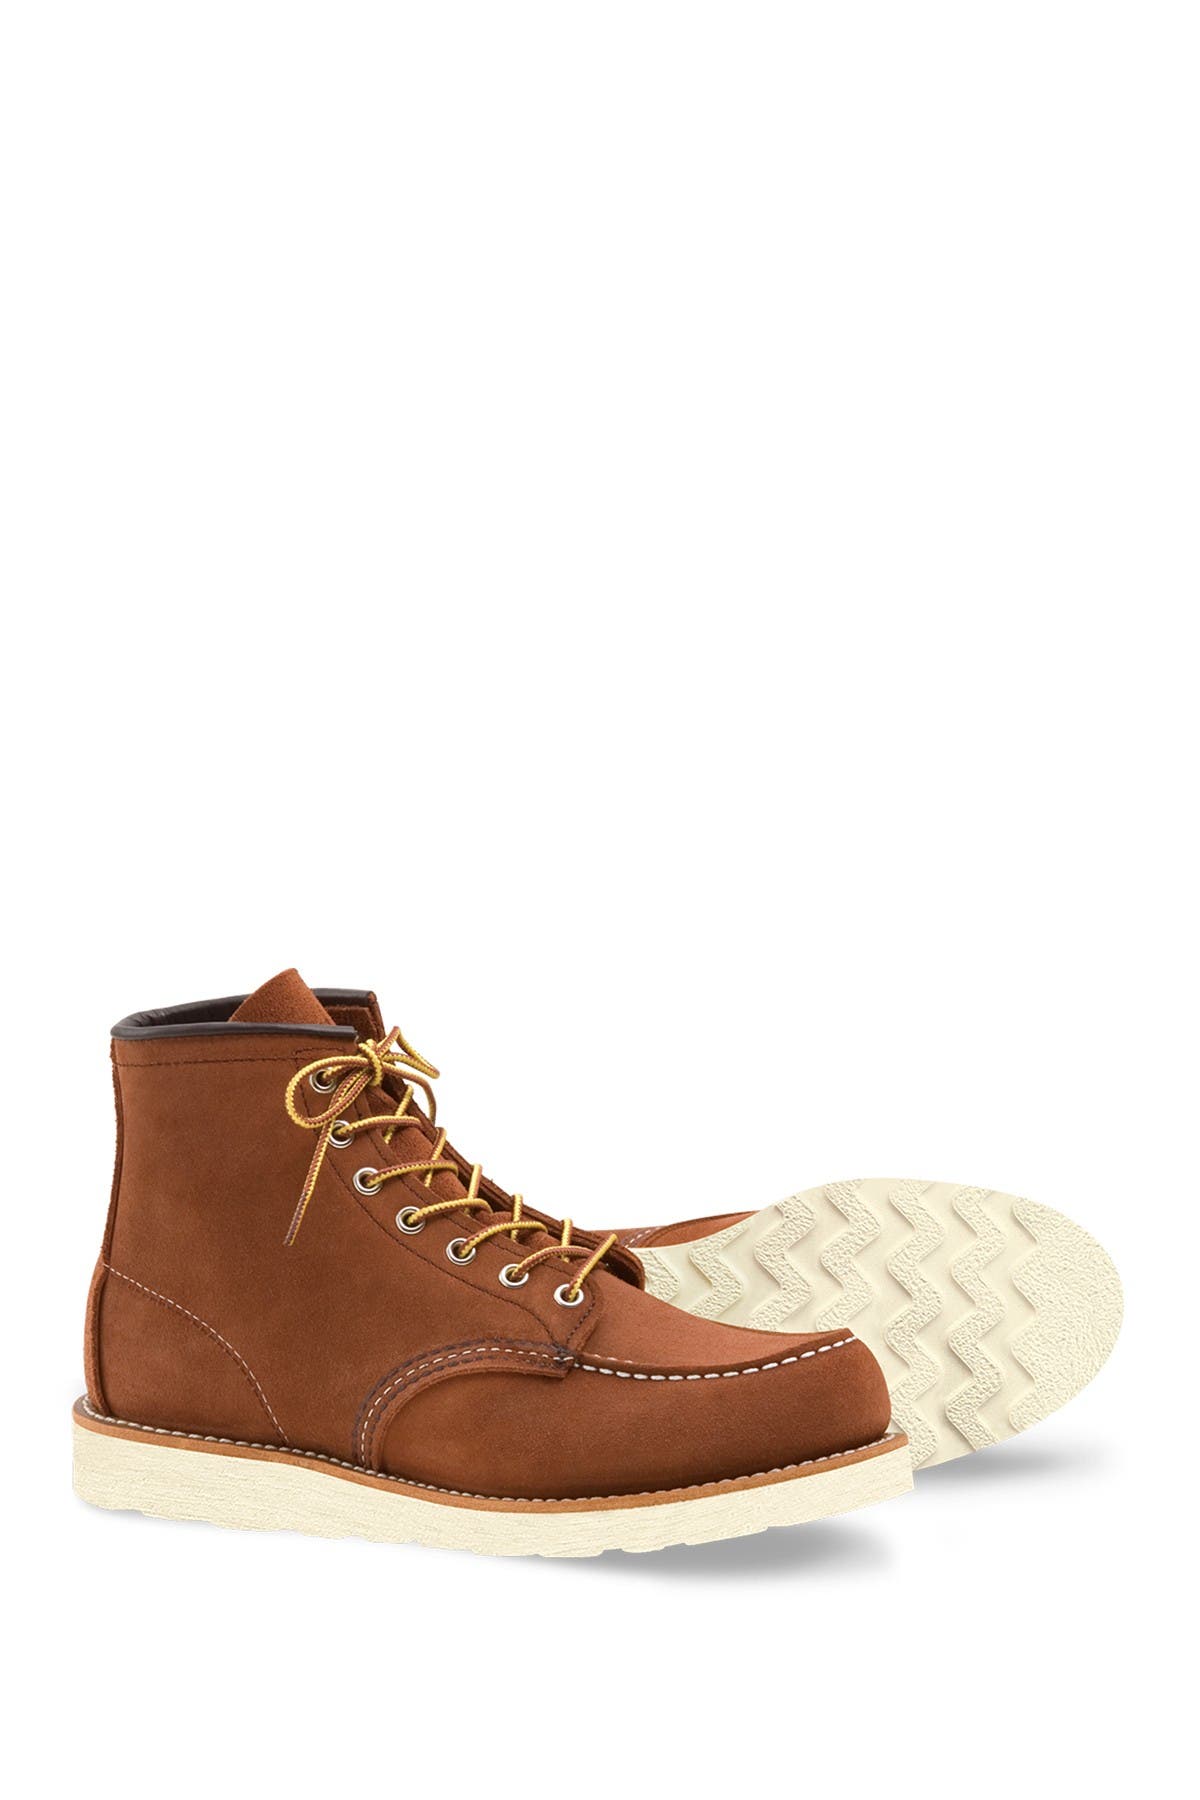 madewell red wing